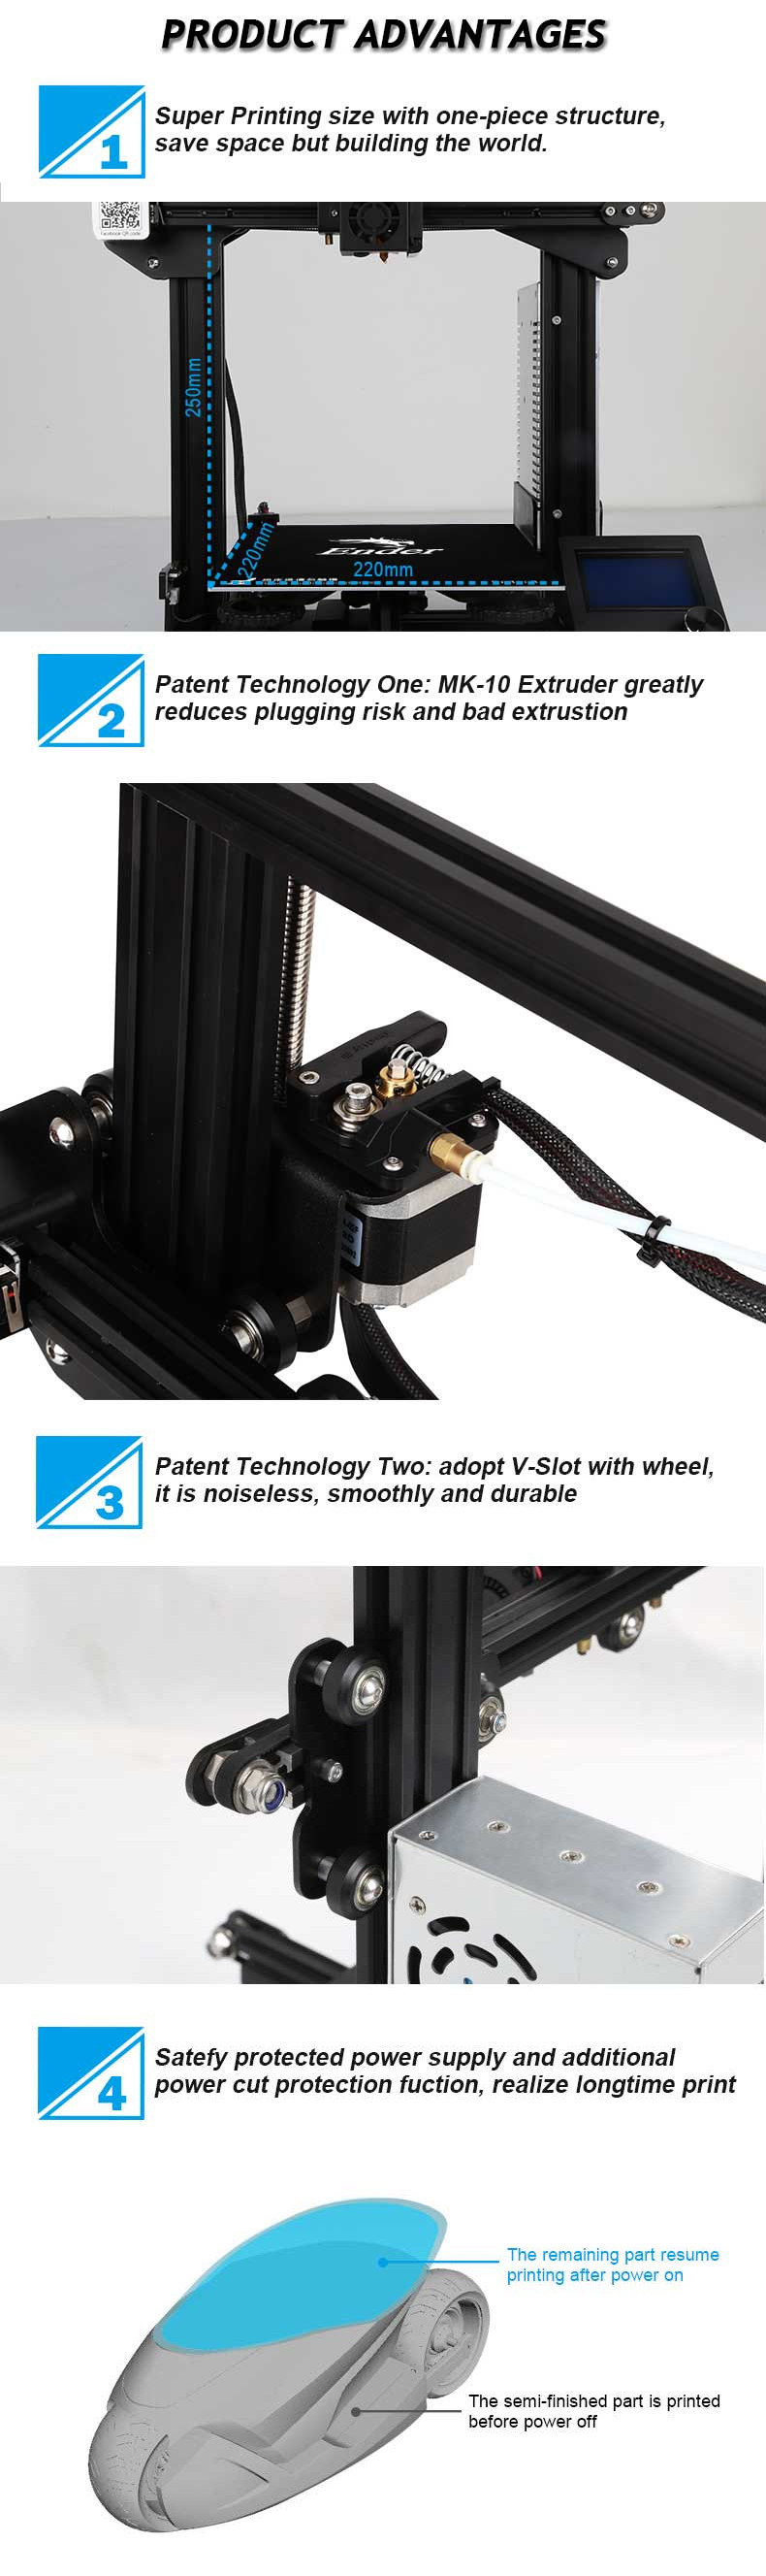 Creality 3D® Ender-3 V-slot Prusa I3 DIY 3D Printer Kit 220x220x250mm Printing Size With Power Resume Function/MK10 Extruder 1.75mm 0.4mm Nozzle 9